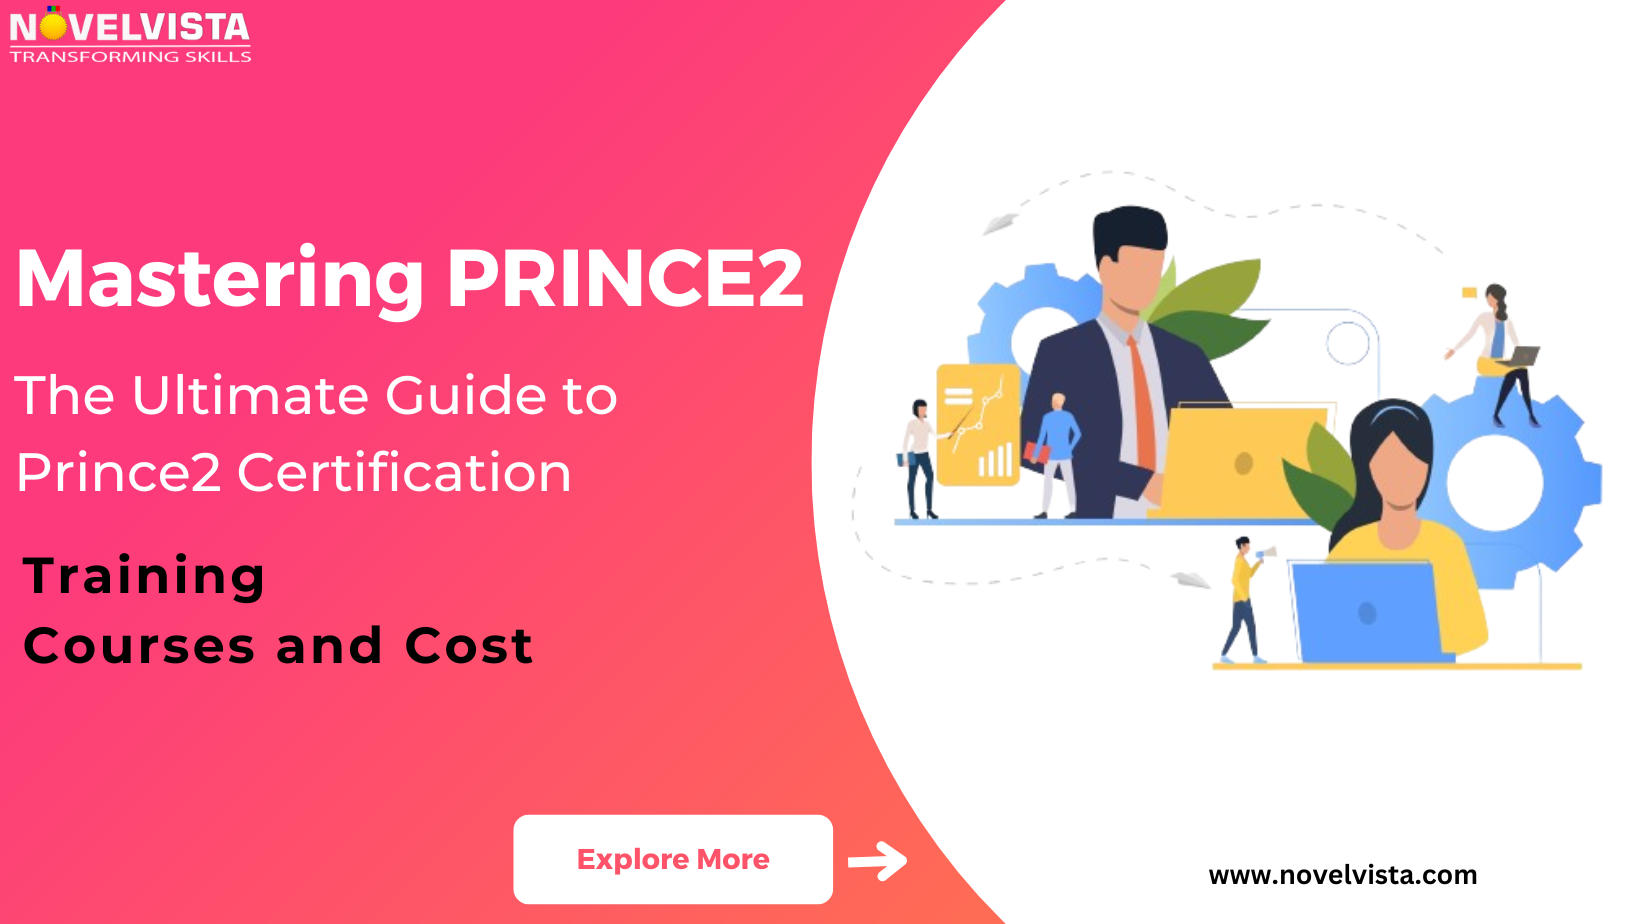 PRINCE2 - The Ultimate Guide to Prince2 Certification